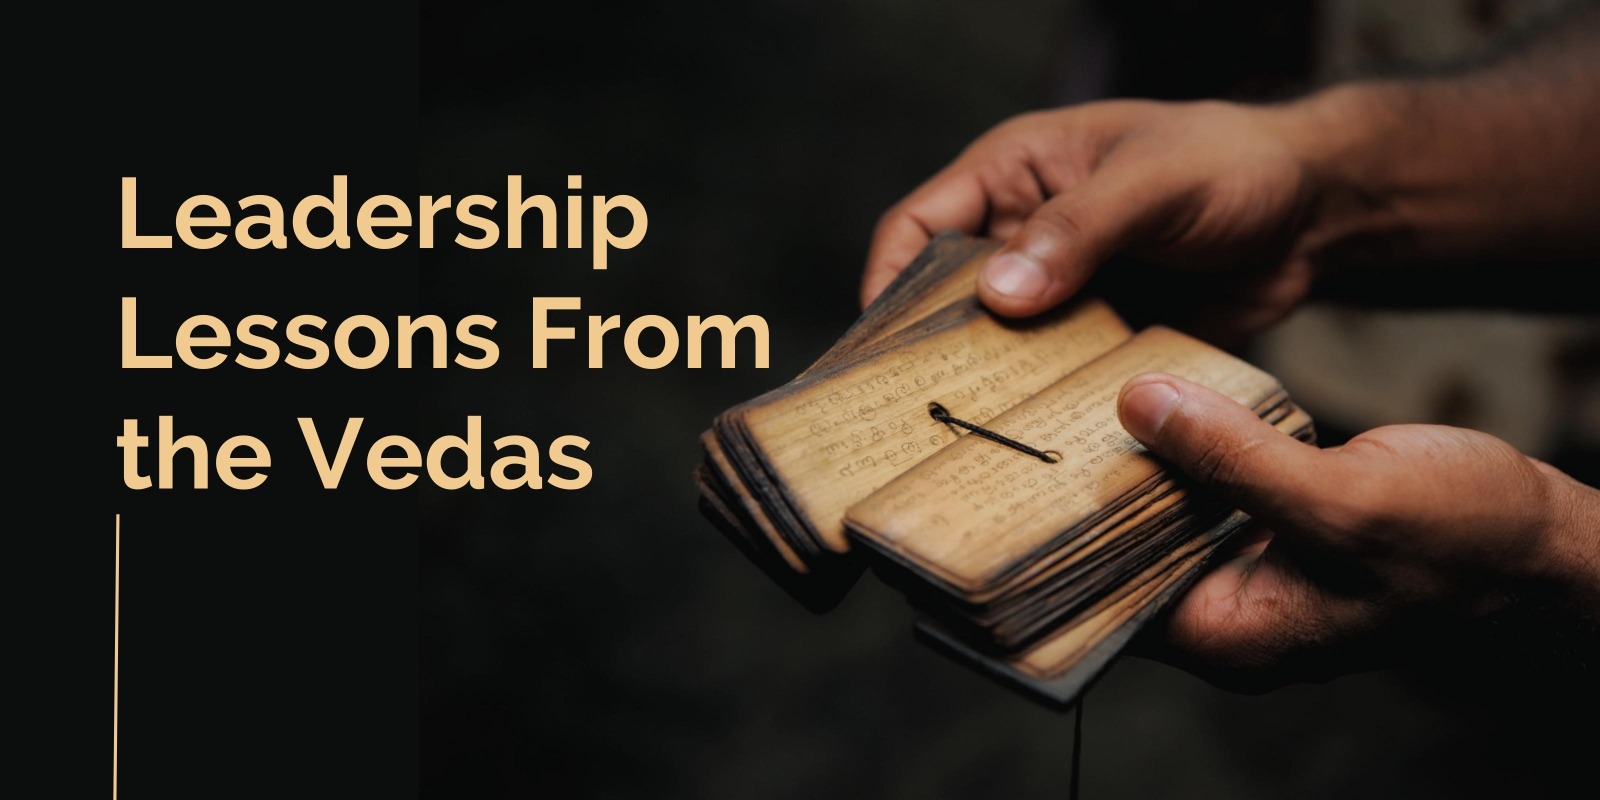 Leadership Lessons From the Vedas